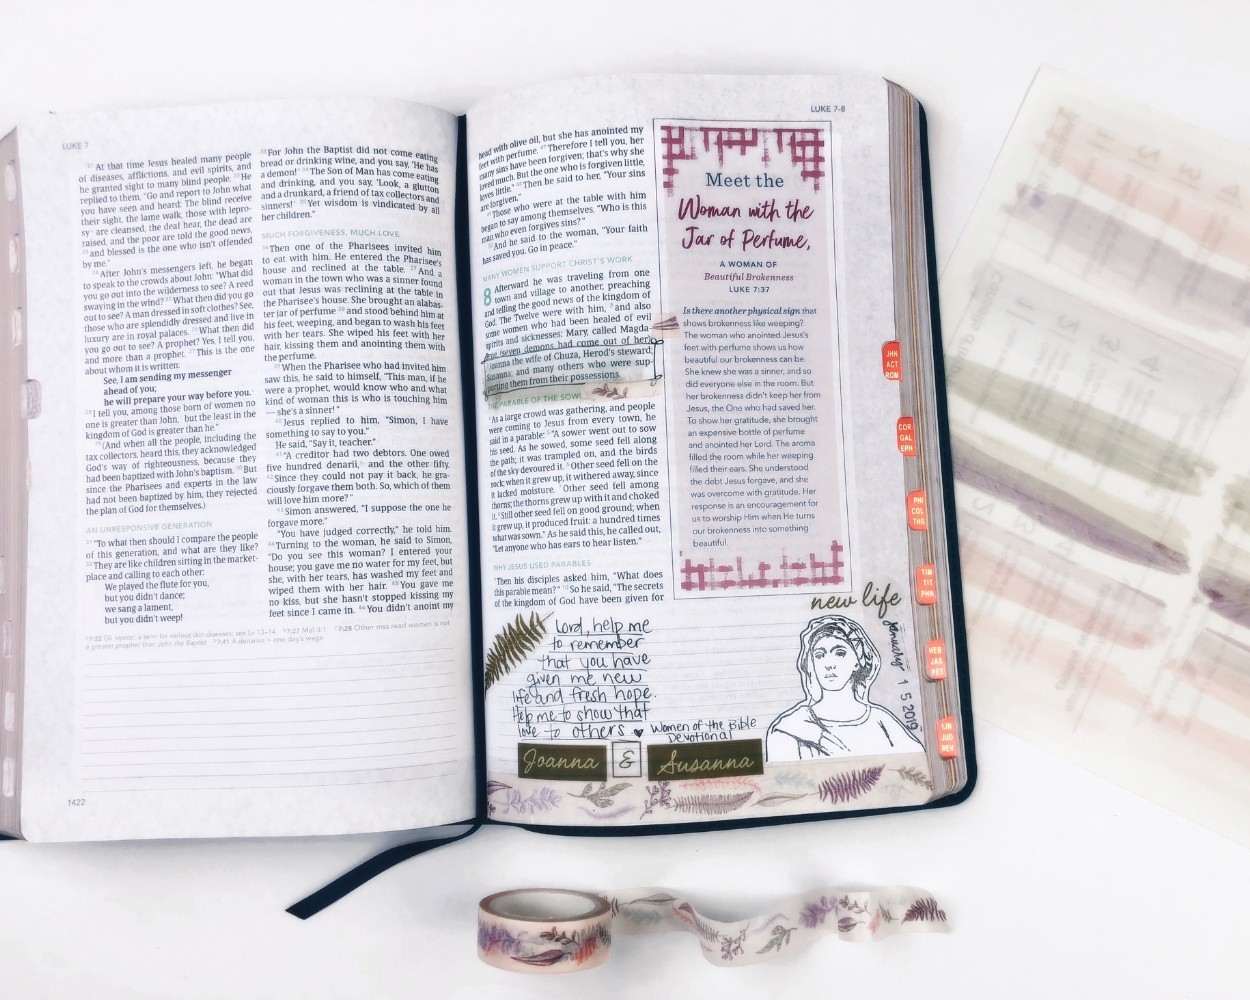 Decorating Travelers Notebook with Printable Stickers for Women of the Bible Study 